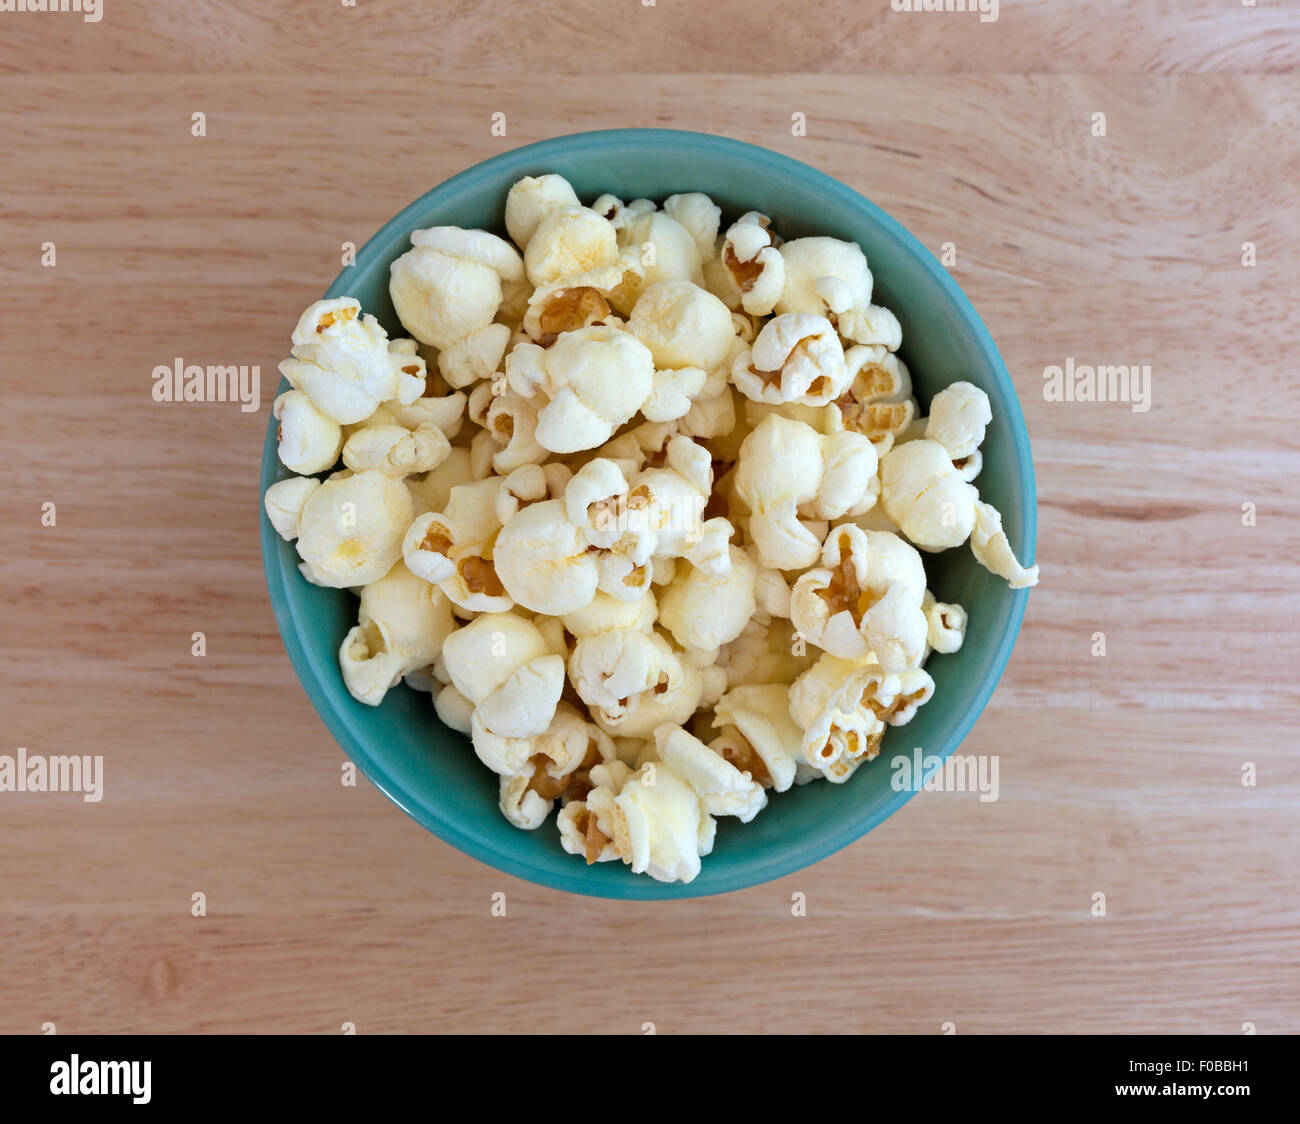 Top view of a small bowl filled with a serving of white cheddar cheese flavored popcorn on a wood table top Stock Photo